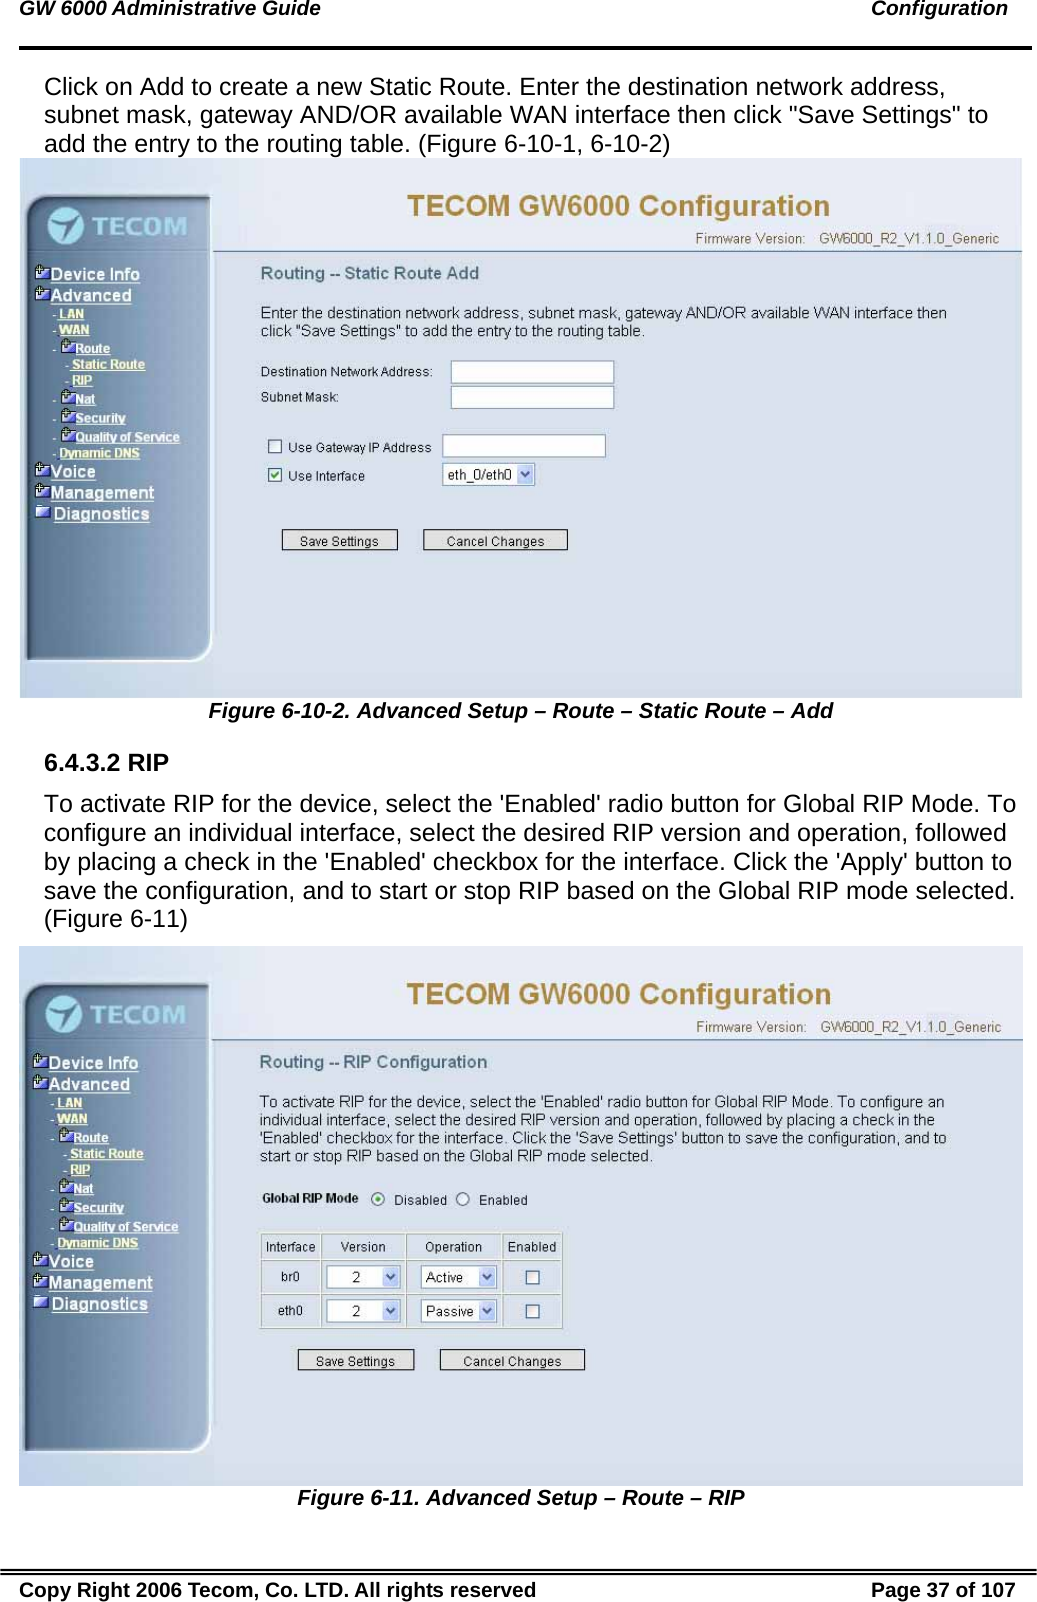 GW 6000 Administrative Guide                                                                                               Configuration Click on Add to create a new Static Route. Enter the destination network address, subnet mask, gateway AND/OR available WAN interface then click &quot;Save Settings&quot; to add the entry to the routing table. (Figure 6-10-1, 6-10-2)  Figure 6-10-2. Advanced Setup – Route – Static Route – Add 6.4.3.2 RIP To activate RIP for the device, select the &apos;Enabled&apos; radio button for Global RIP Mode. To configure an individual interface, select the desired RIP version and operation, followed by placing a check in the &apos;Enabled&apos; checkbox for the interface. Click the &apos;Apply&apos; button to save the configuration, and to start or stop RIP based on the Global RIP mode selected. (Figure 6-11)  Figure 6-11. Advanced Setup – Route – RIP Copy Right 2006 Tecom, Co. LTD. All rights reserved  Page 37 of 107 